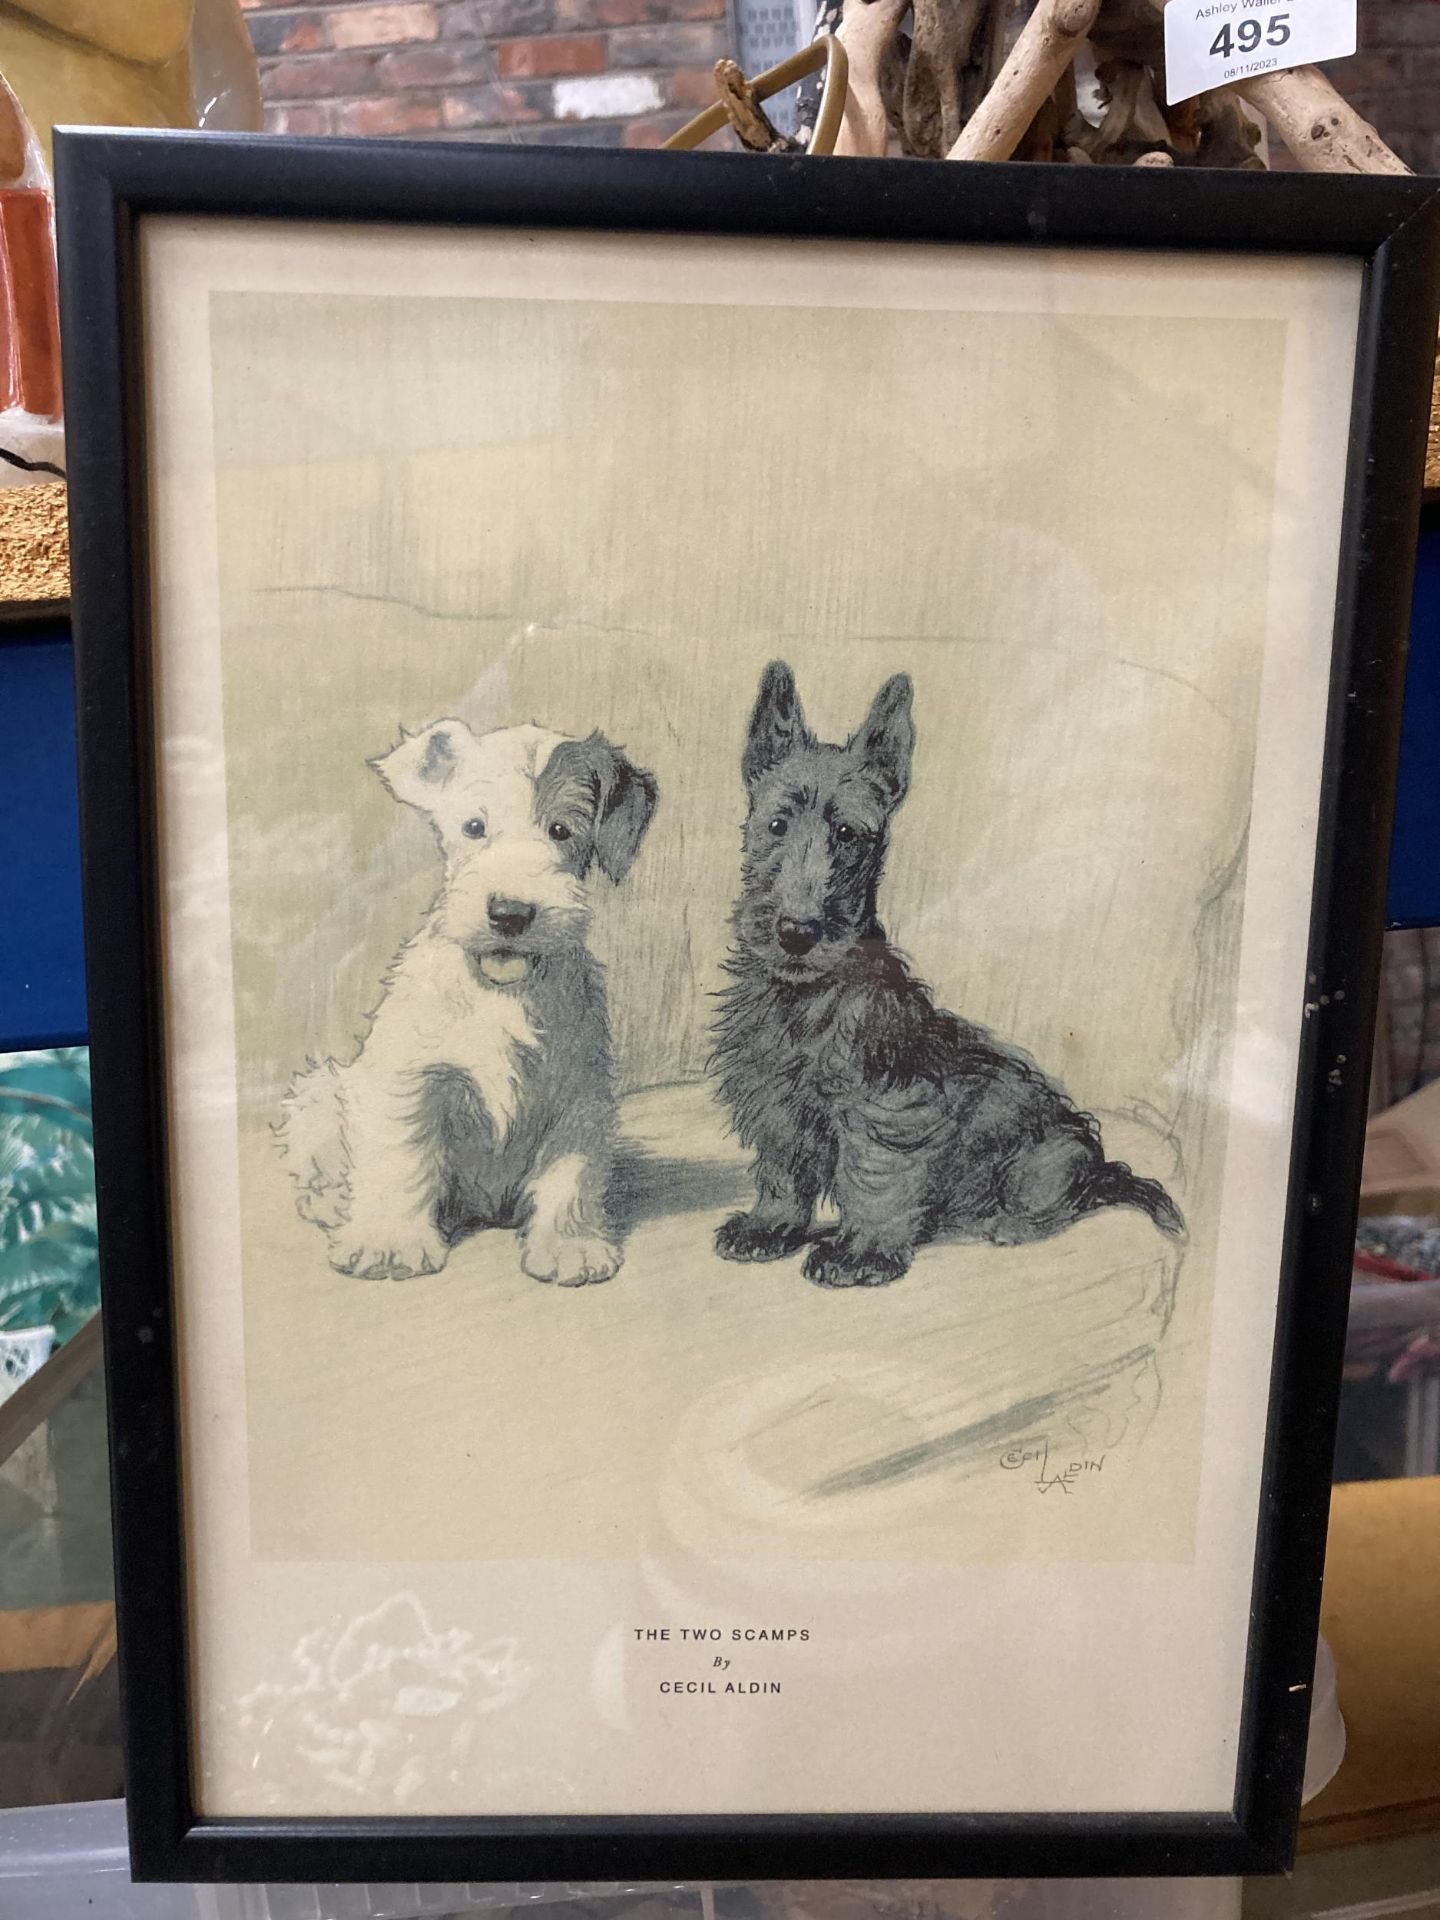 THREE FRAMED CECIL ALDIN PRINTS - 'THE TWO SCAMPS', 'THE TWO FRIENDS' AND 'THE TWO SPORTSMEN' - - Image 2 of 4